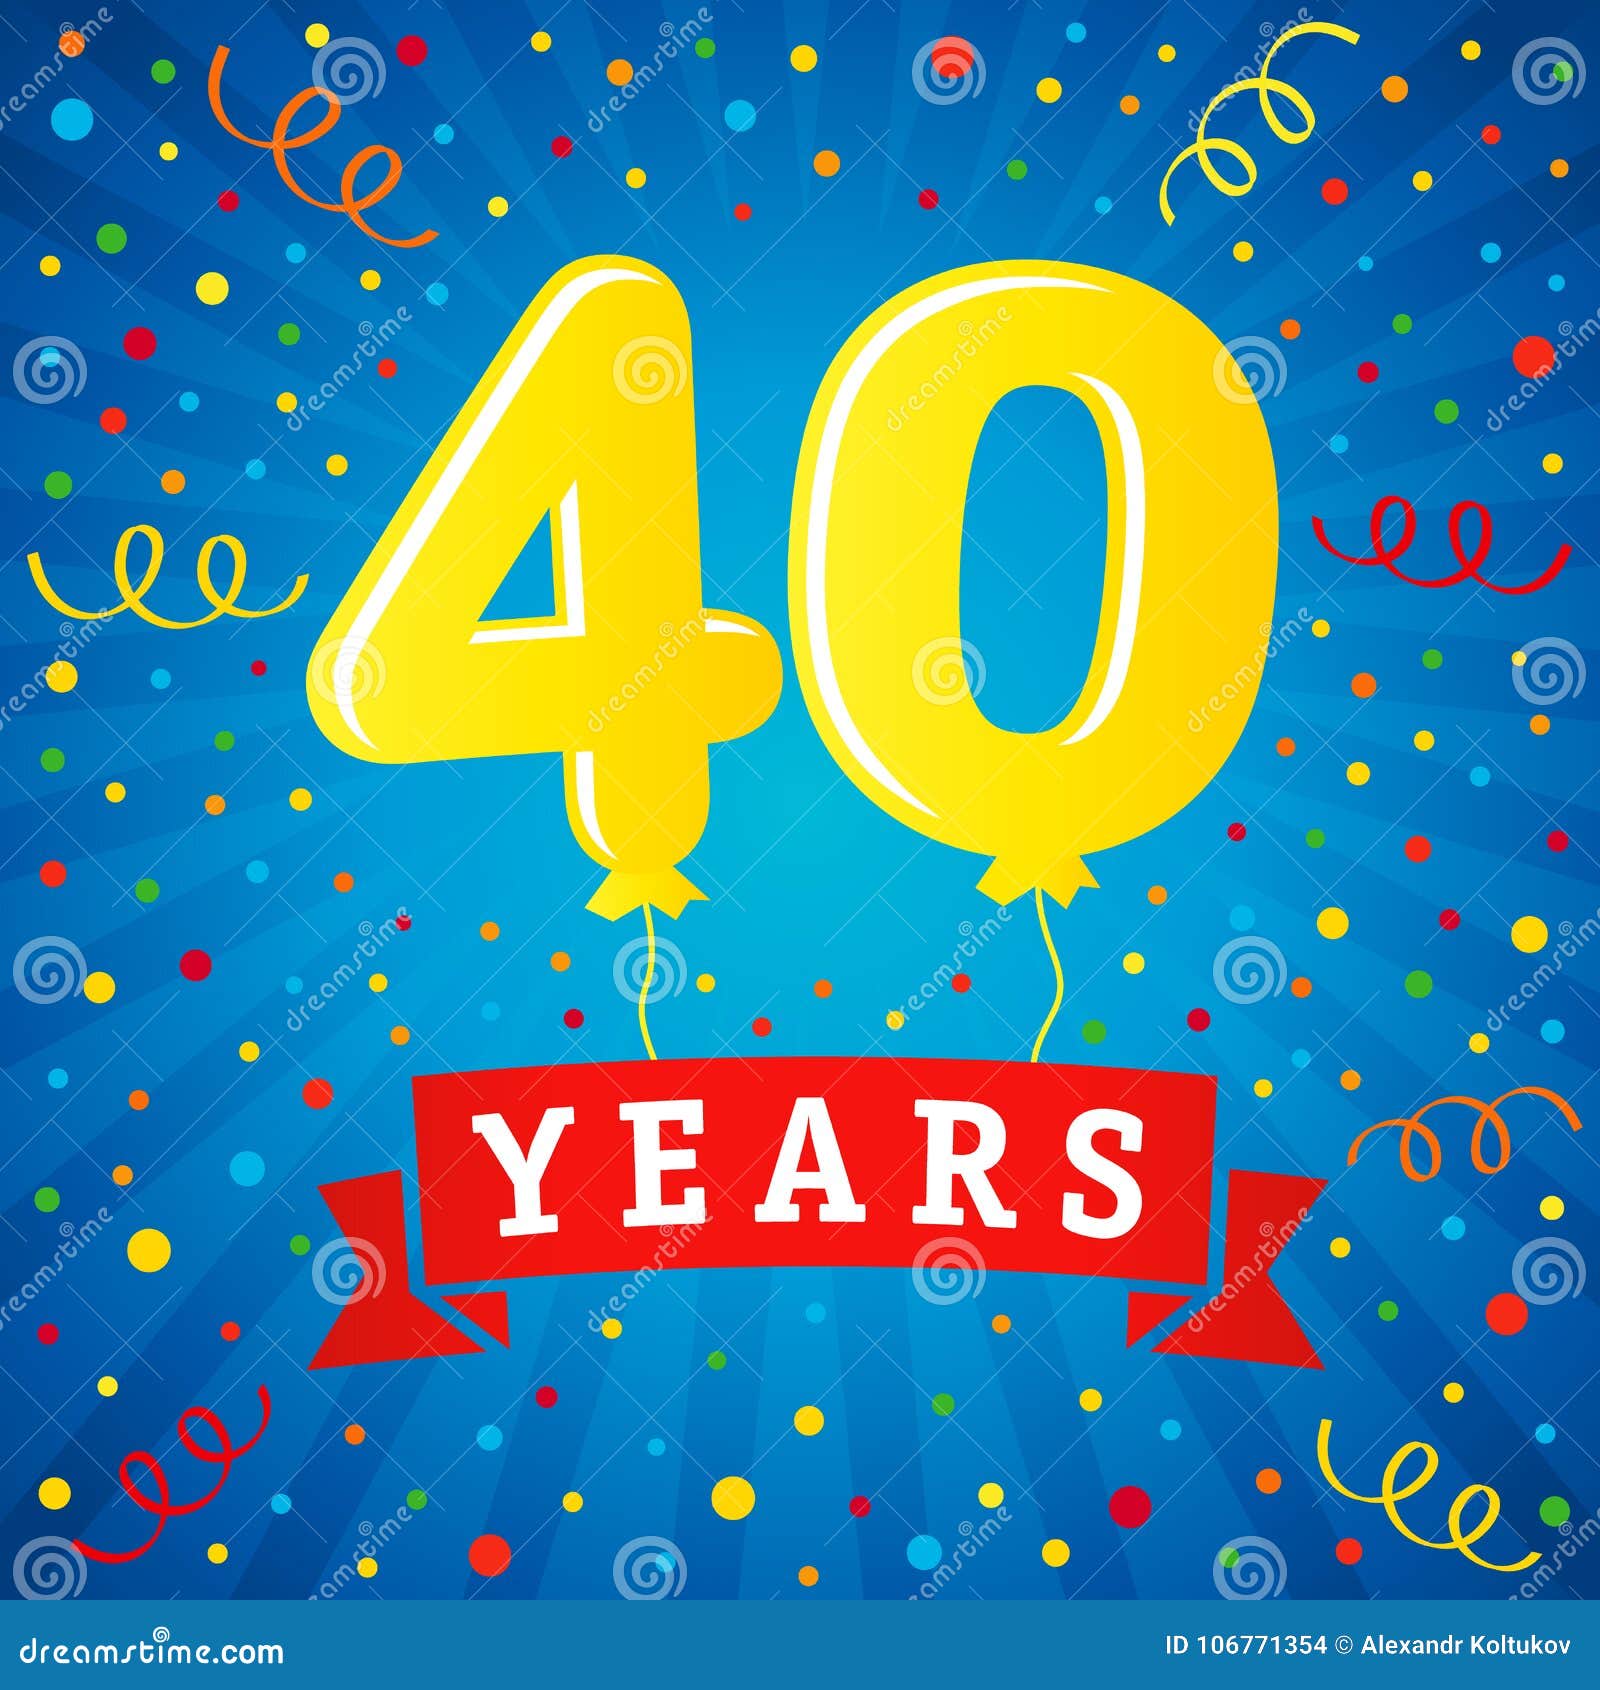 40 Years Anniversary Celebration with Colored Balloons Stock Vector ...